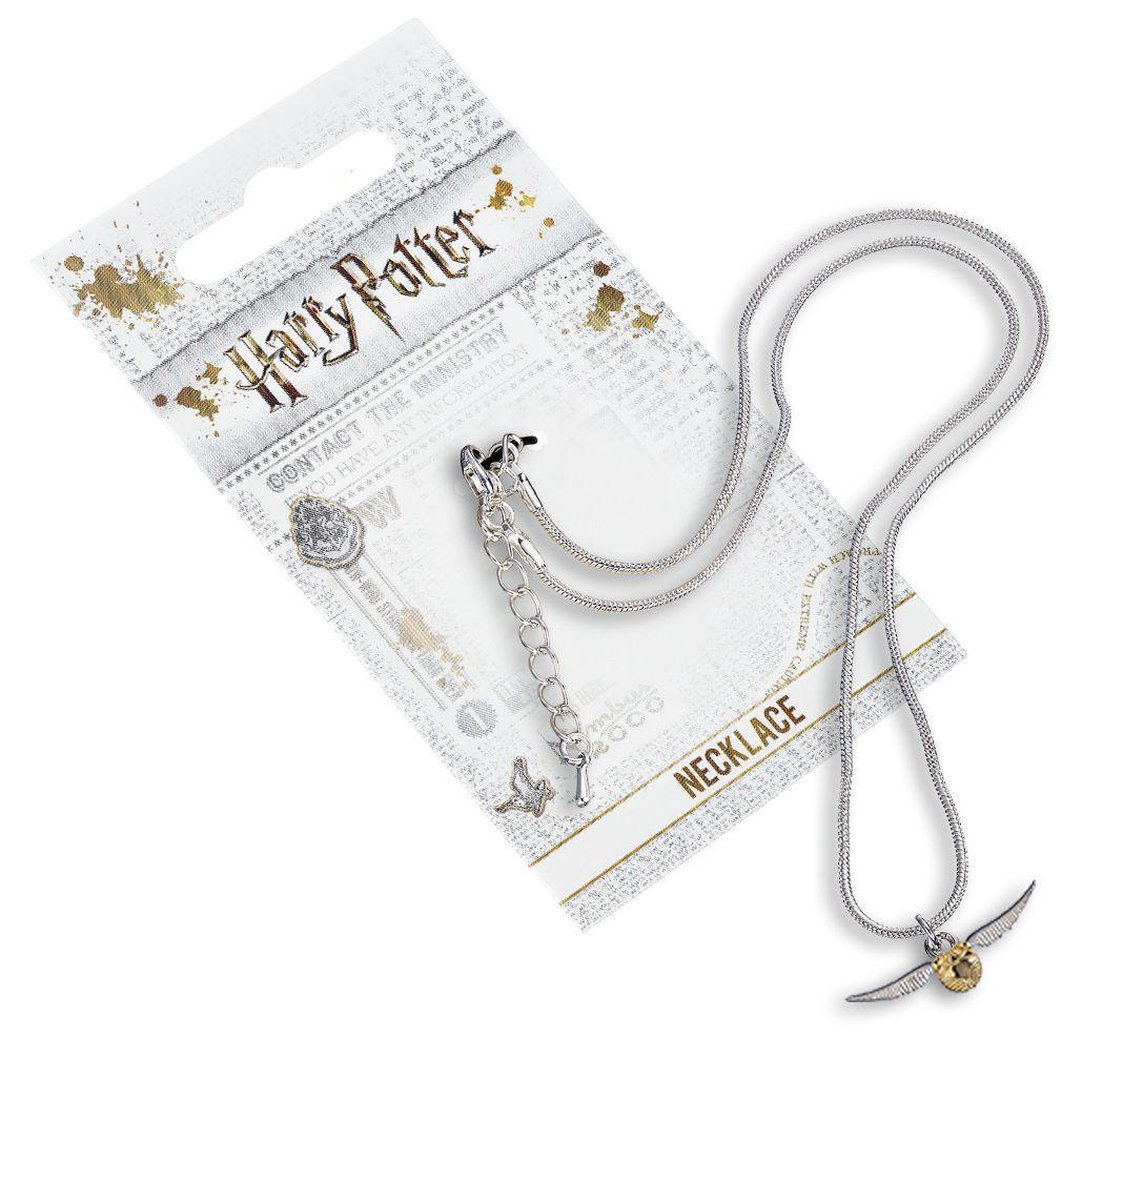 Harry Potter - Golden Snitch Necklace - Warner Bros. Entertainment